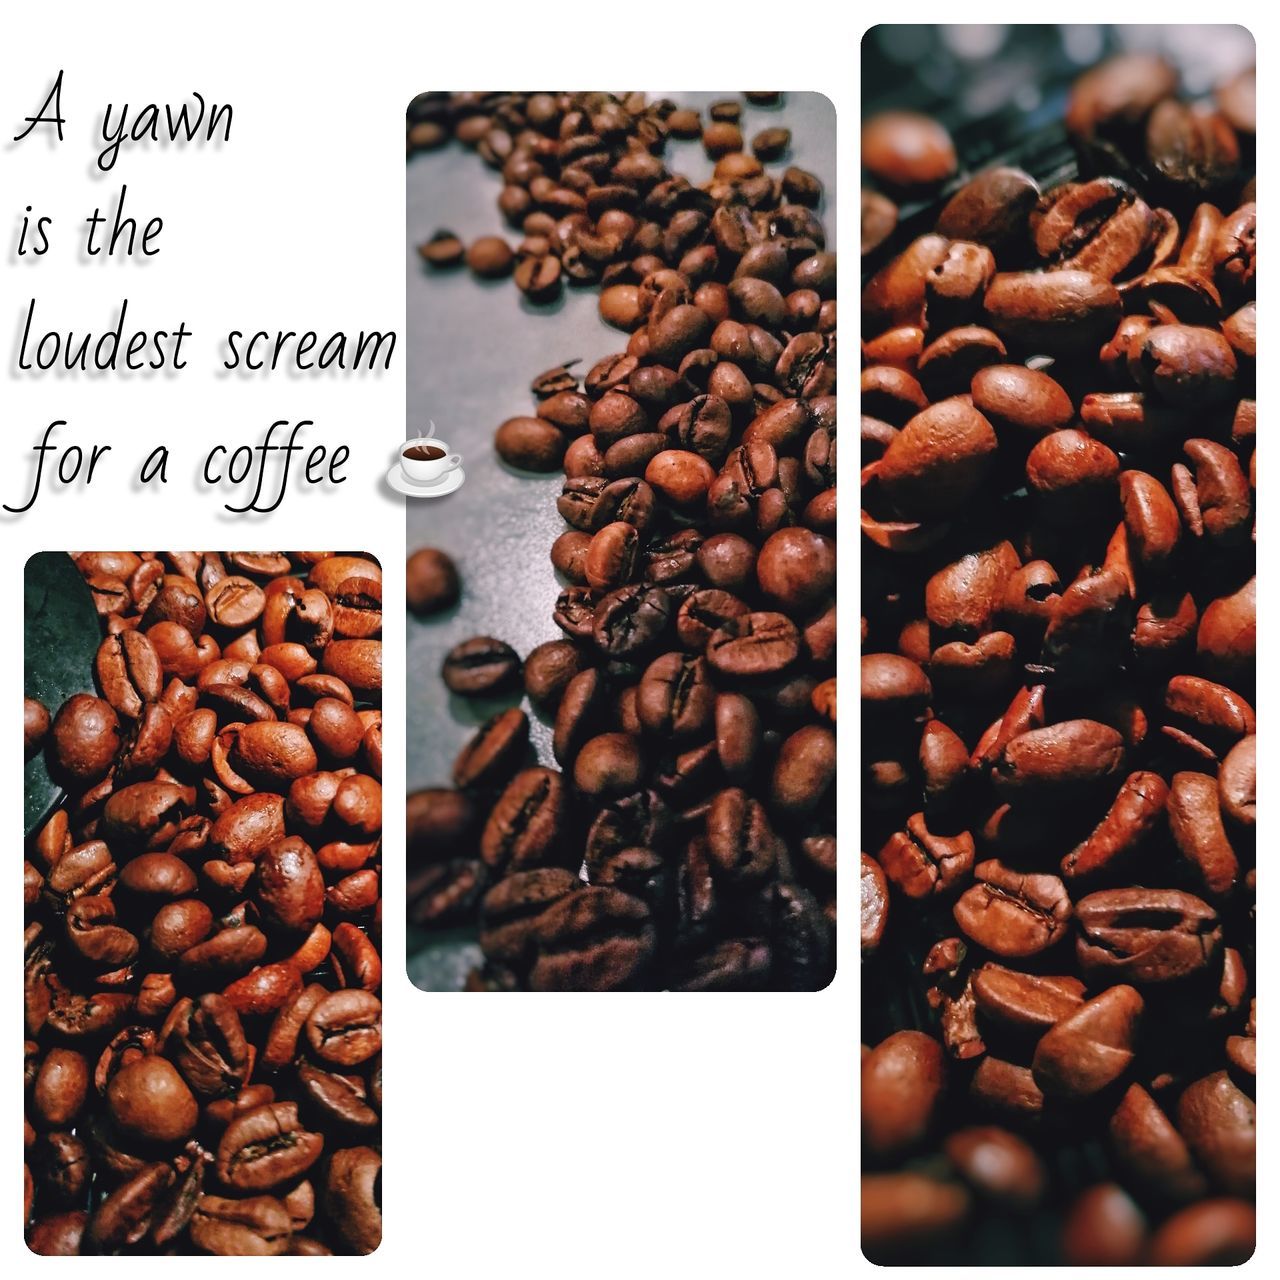 food and drink, food, roasted coffee bean, freshness, coffee, coffee - drink, indoors, brown, still life, coffee bean, large group of objects, choice, abundance, no people, text, variation, close-up, refreshment, drink, roasted, caffeine